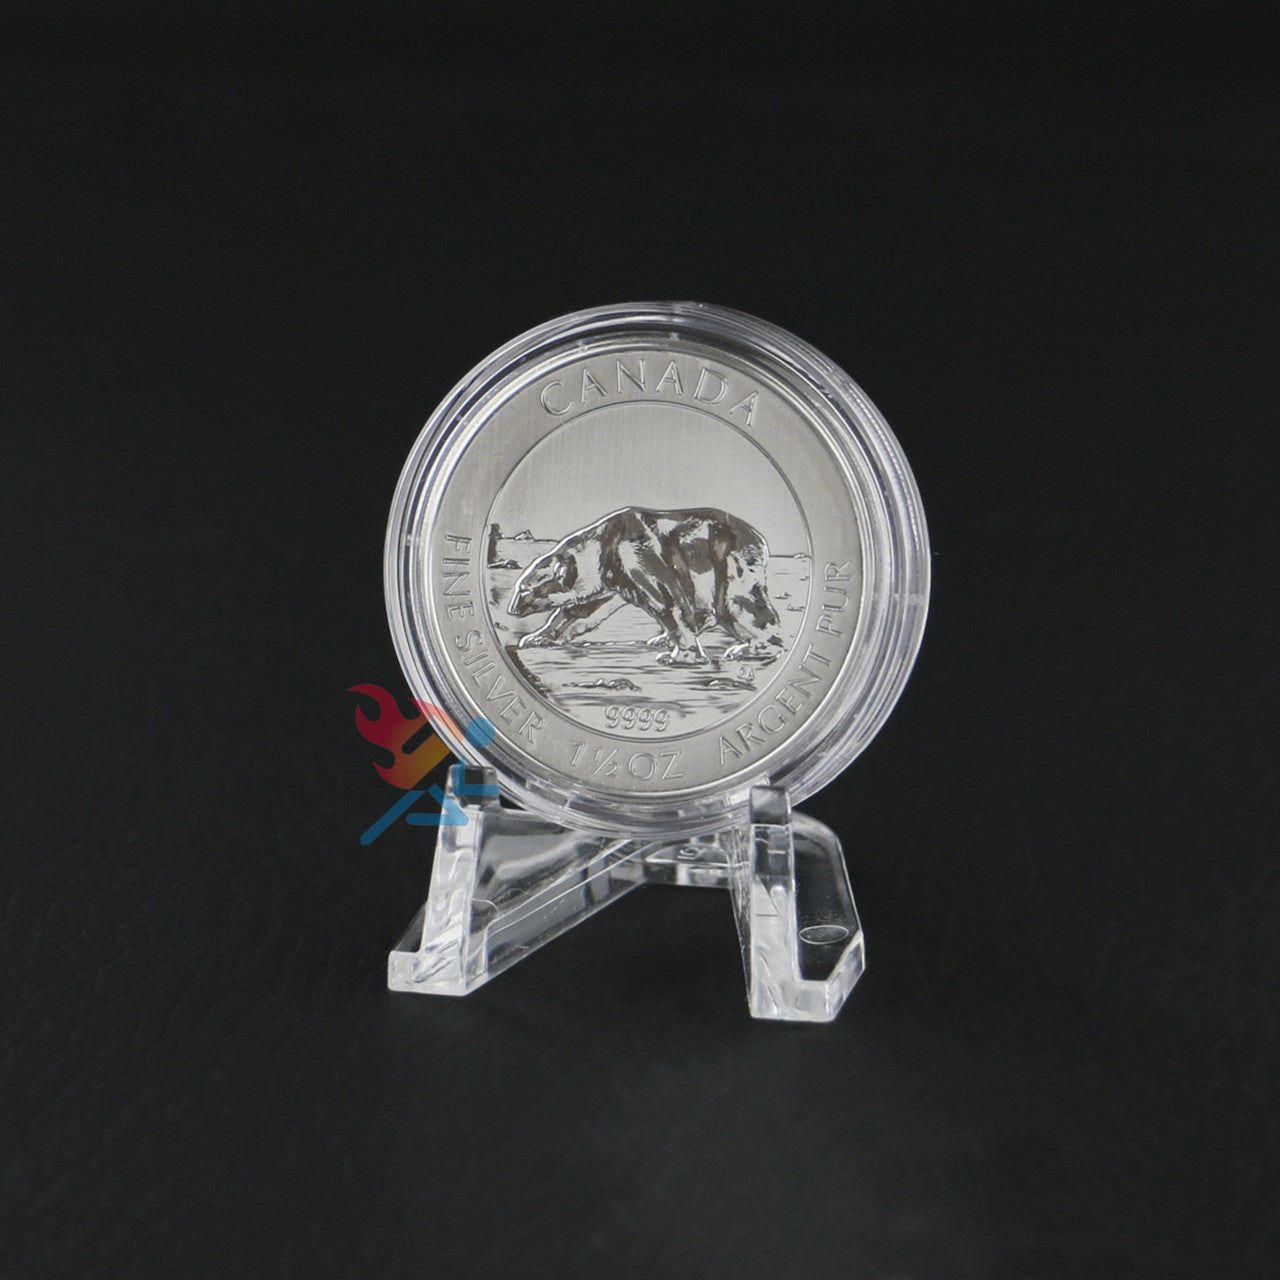 38mm Direct Fit for 1.5oz Canadian Silver $8 Wildlife Coins